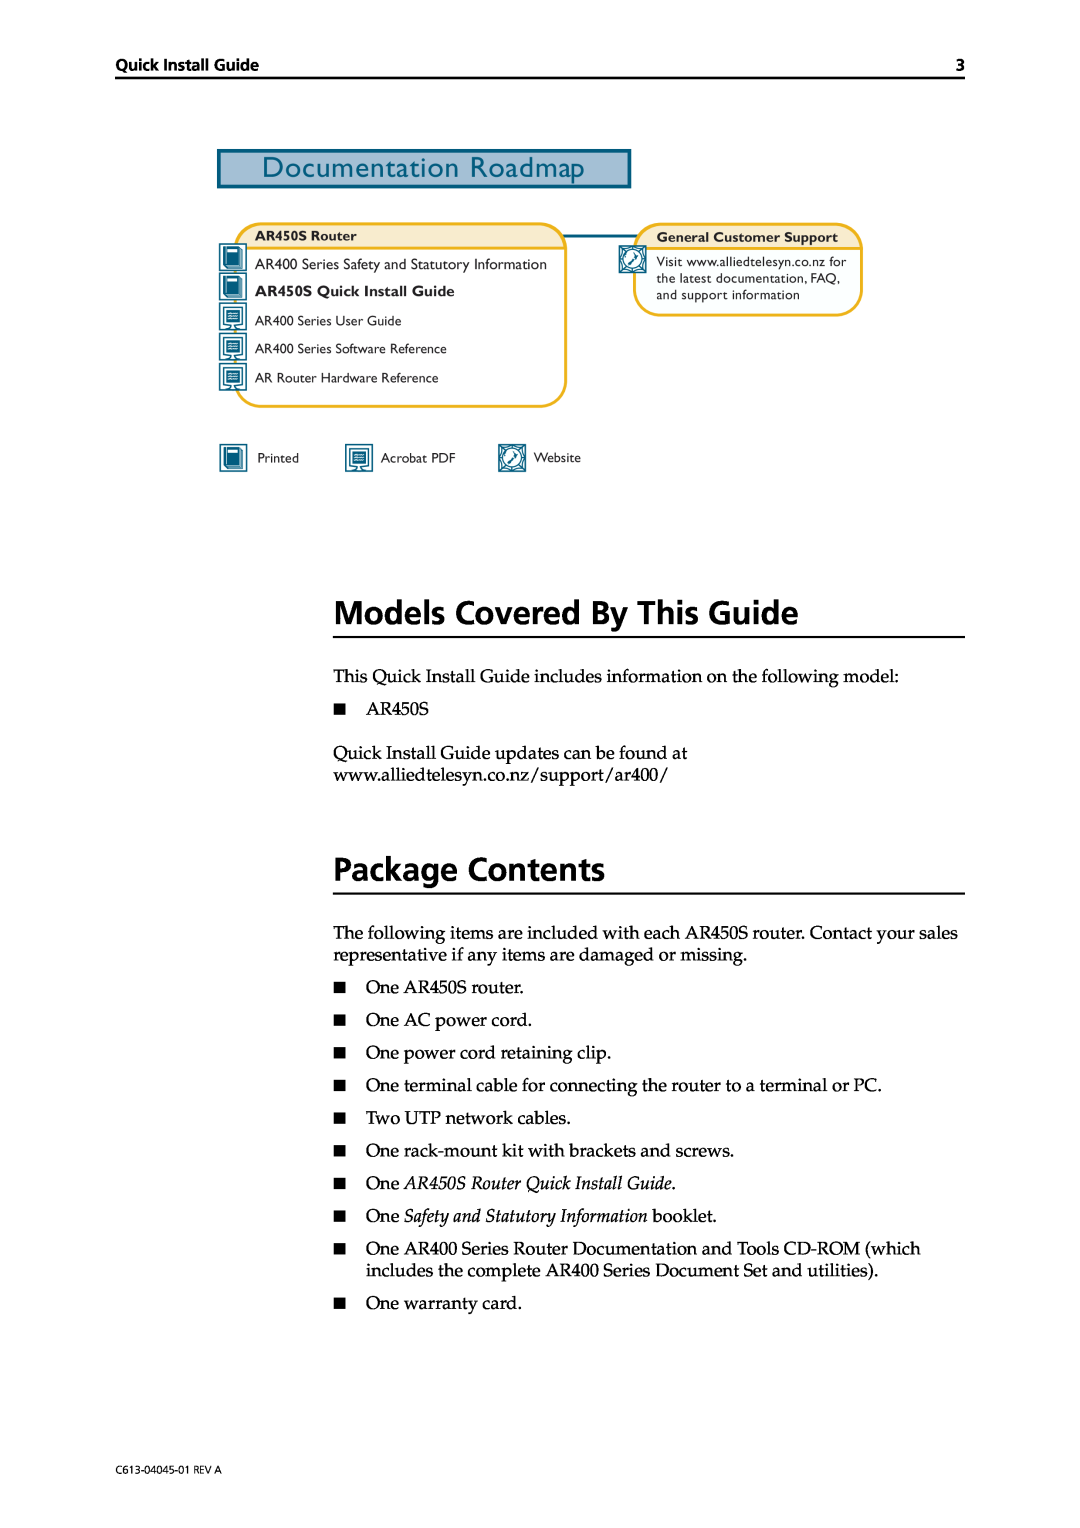 Allied Telesis manual Models Covered By This Guide, Package Contents, One AR450S Router Quick Install Guide 